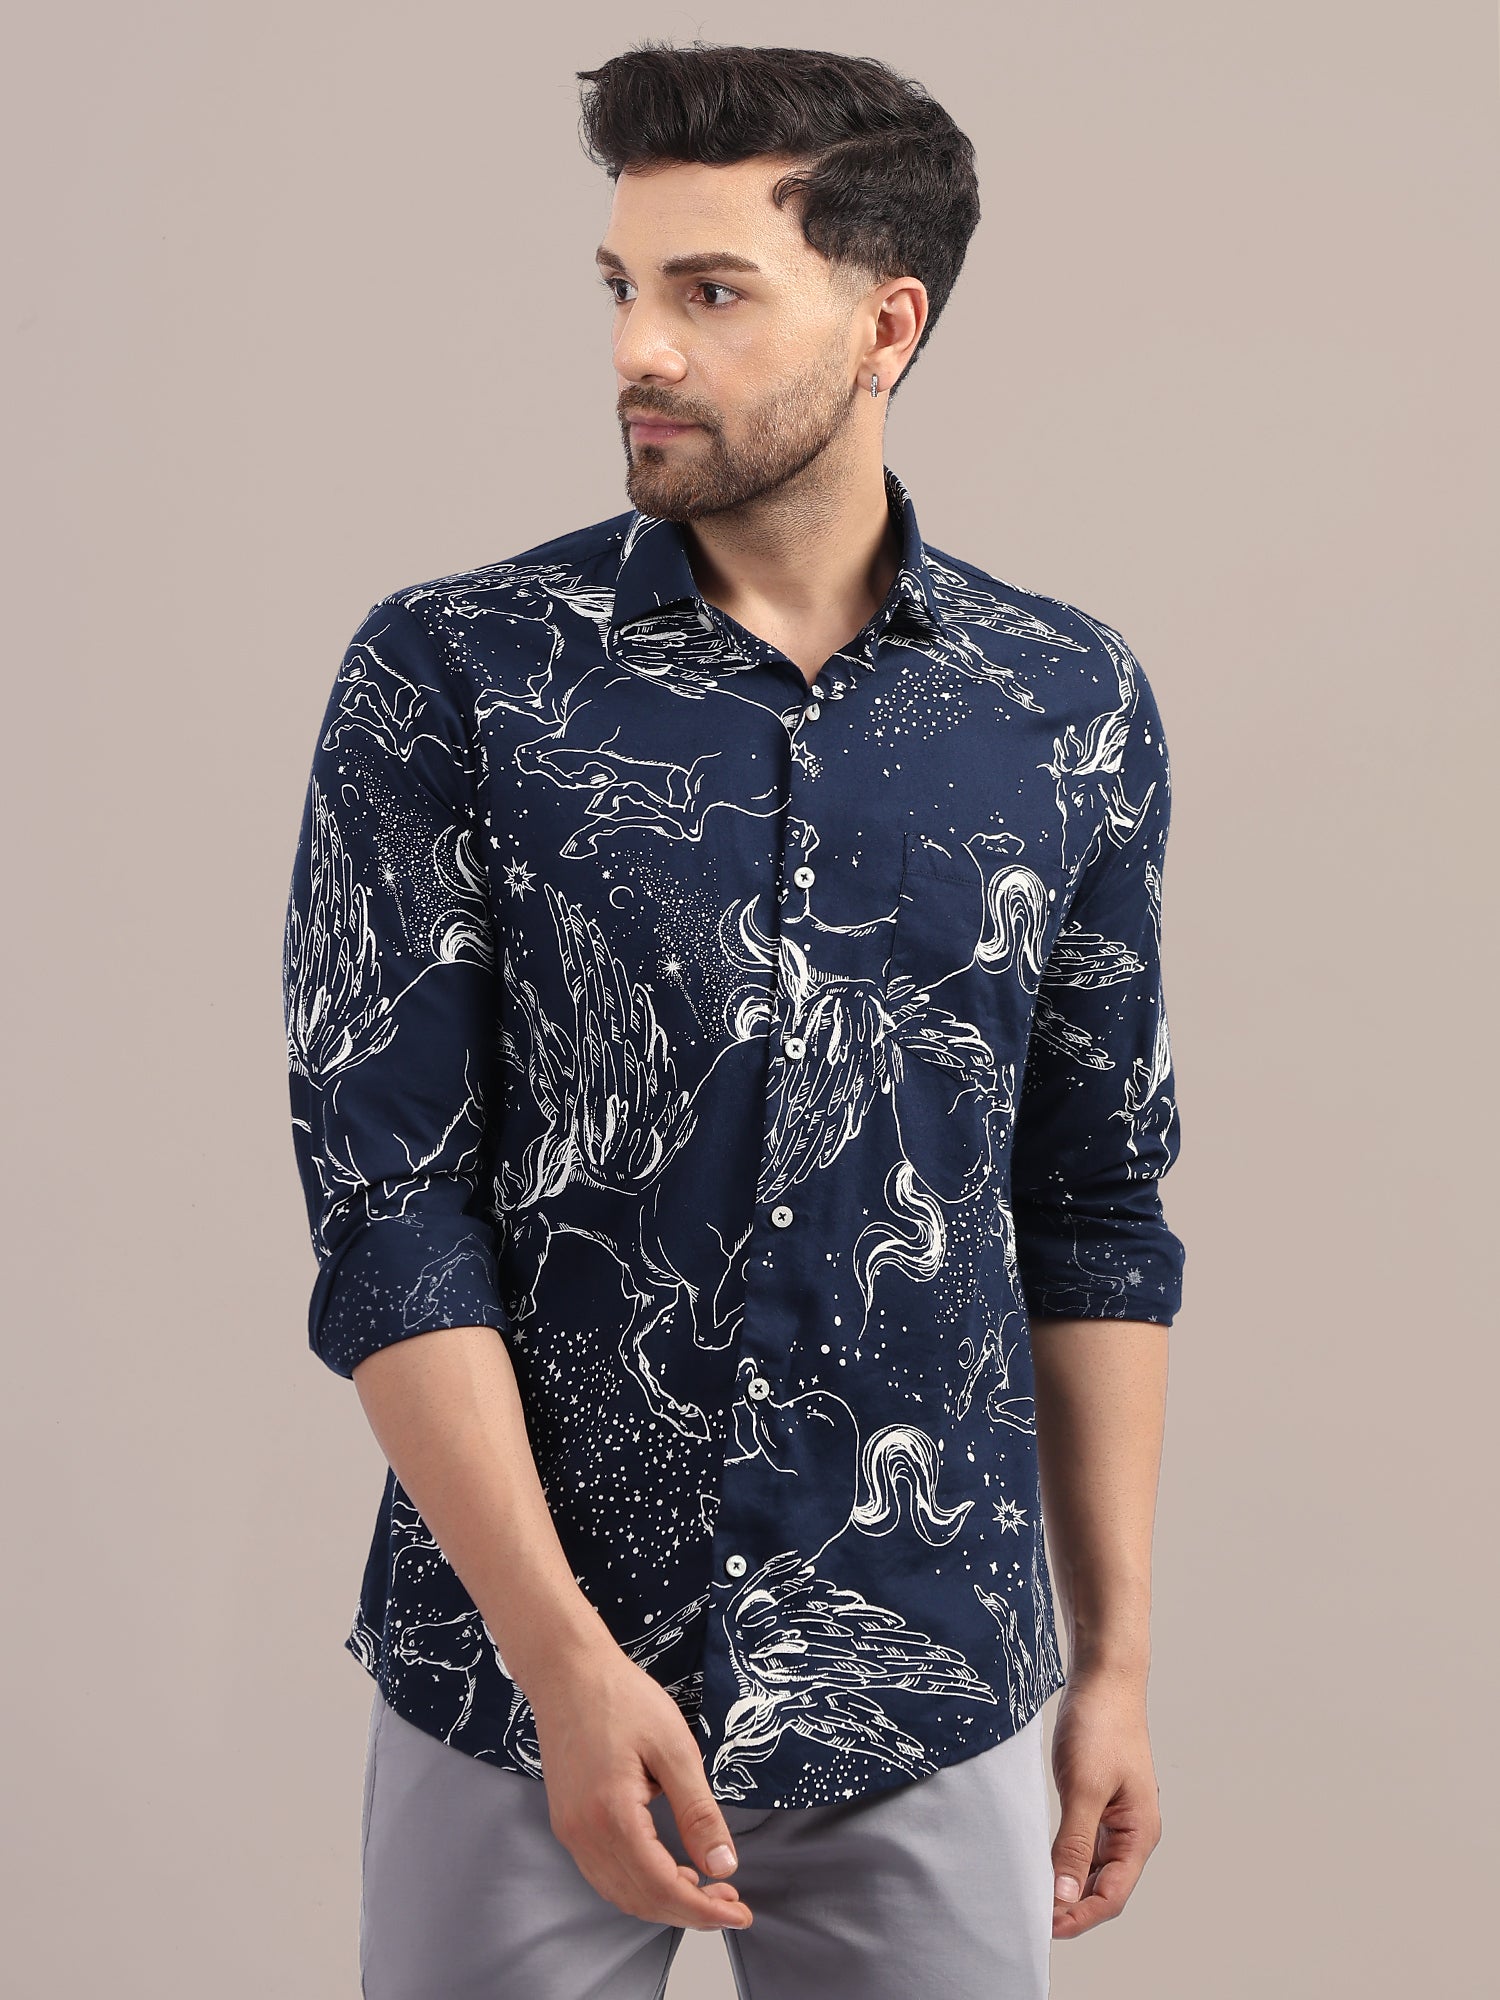 AMSWAN PREMIUM SHIRT WITH SPREAD COLLAR IN SMART FIT AND PRINTED DESIGN FOR MEN'S